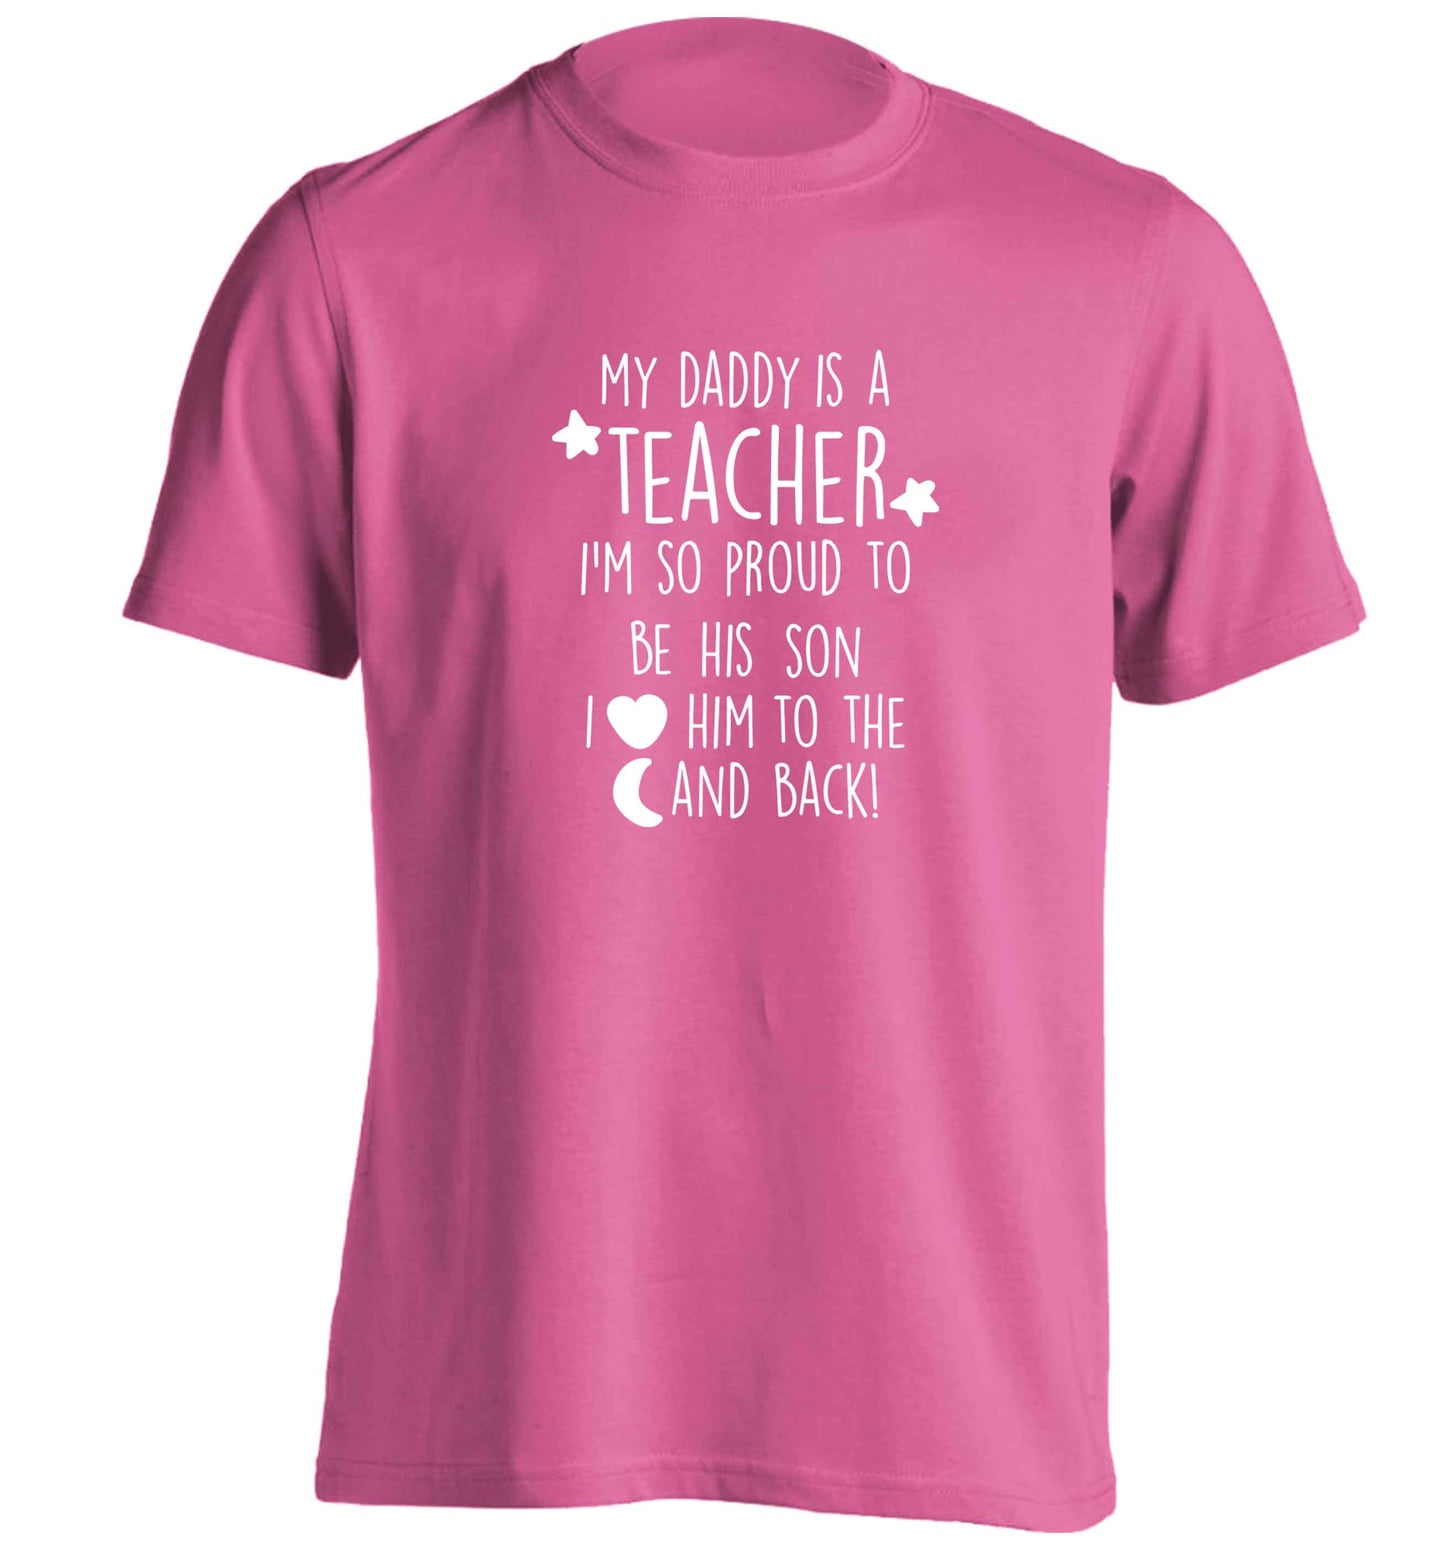 My daddy is a teacher I'm so proud to be his son I love her to the moon and back adults unisex pink Tshirt 2XL